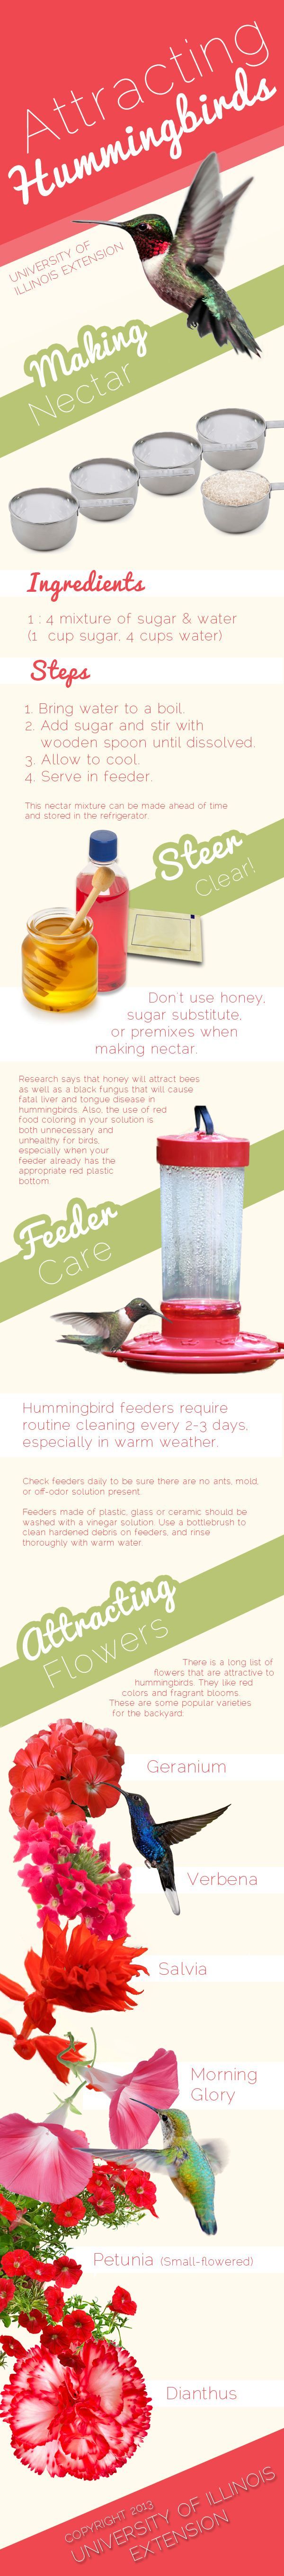 Learn some simple ways to attract hummingbirds to your garden.